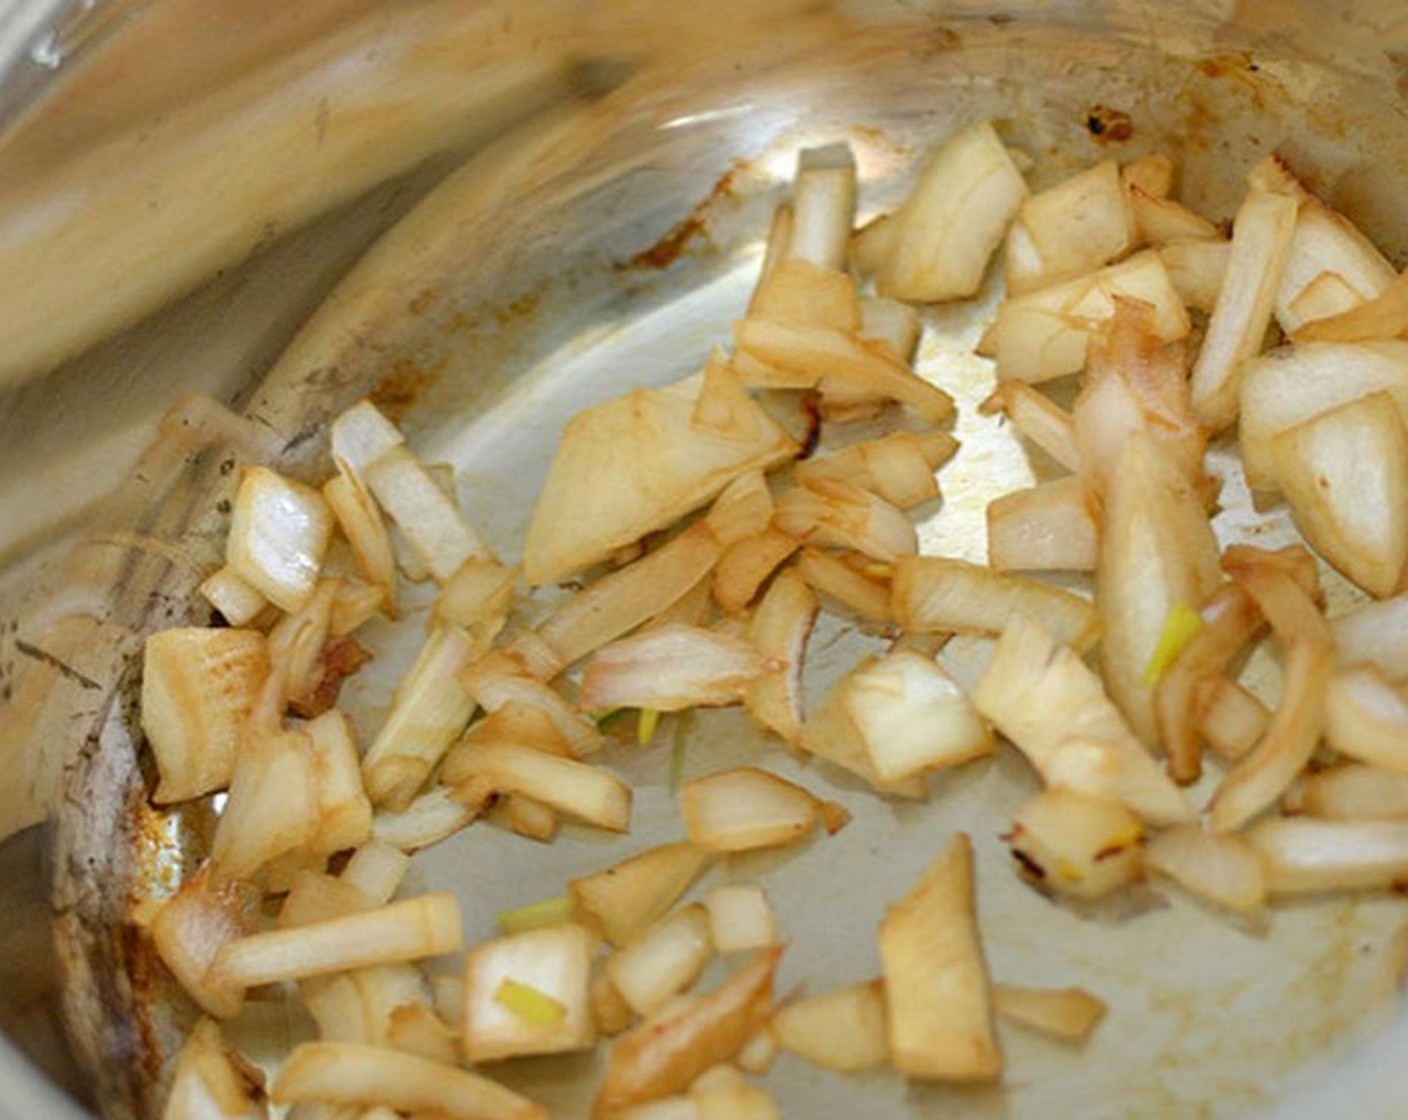 step 2 Saute the onion in a dry pan (or add pinch of Granulated Sugar (to taste) if you would like) for a minute until it starts to caramelize. Add Garlic (to taste) if you're using it and don't let it brown.